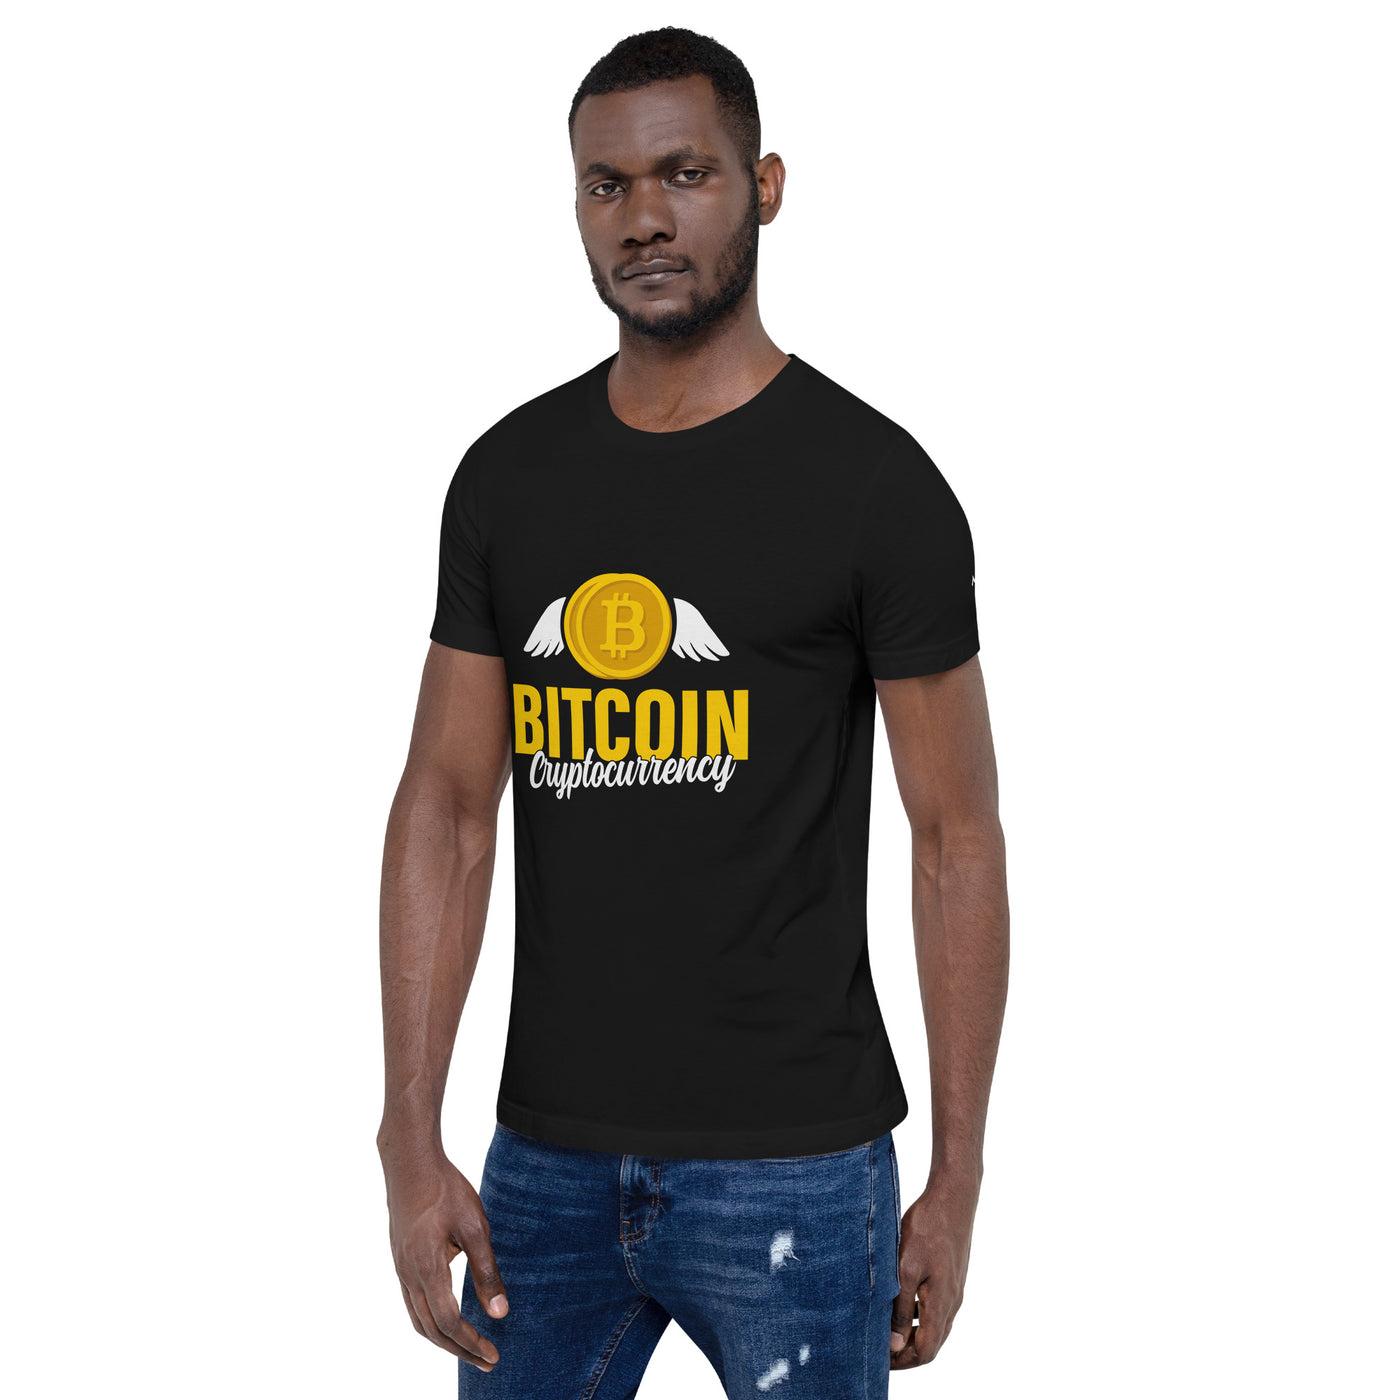 Bitcoin Cryptocurrency - Unisex t-shirt